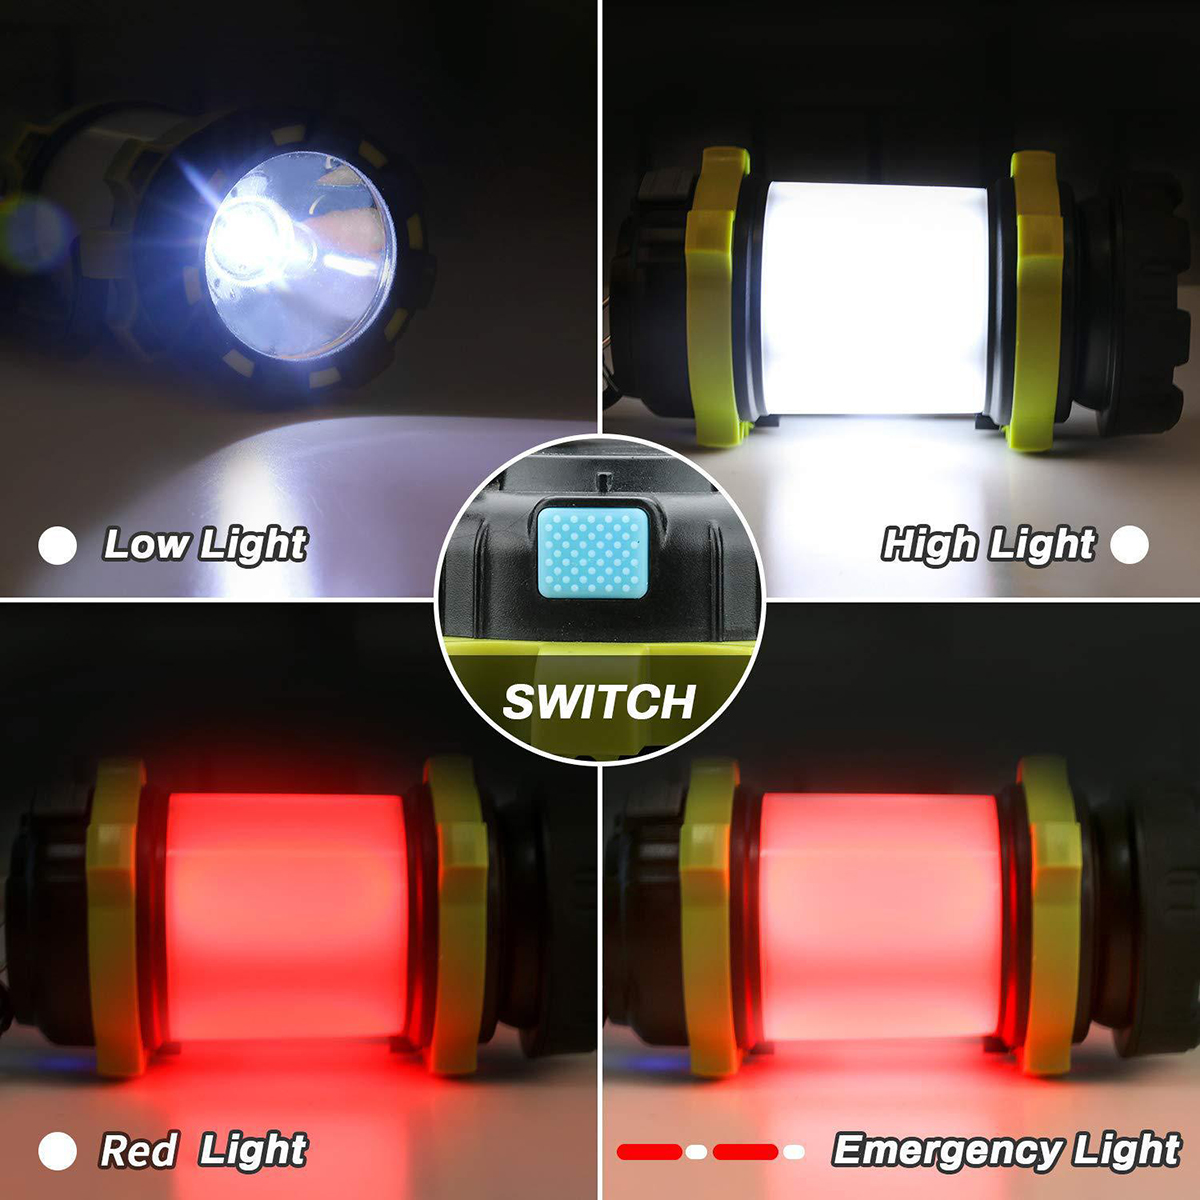 LED-Flashlight-Camping-Light-Torch-Lantern-USB-Rechargeable-USB-Charger-Worklight-Waterproof-1612111-4